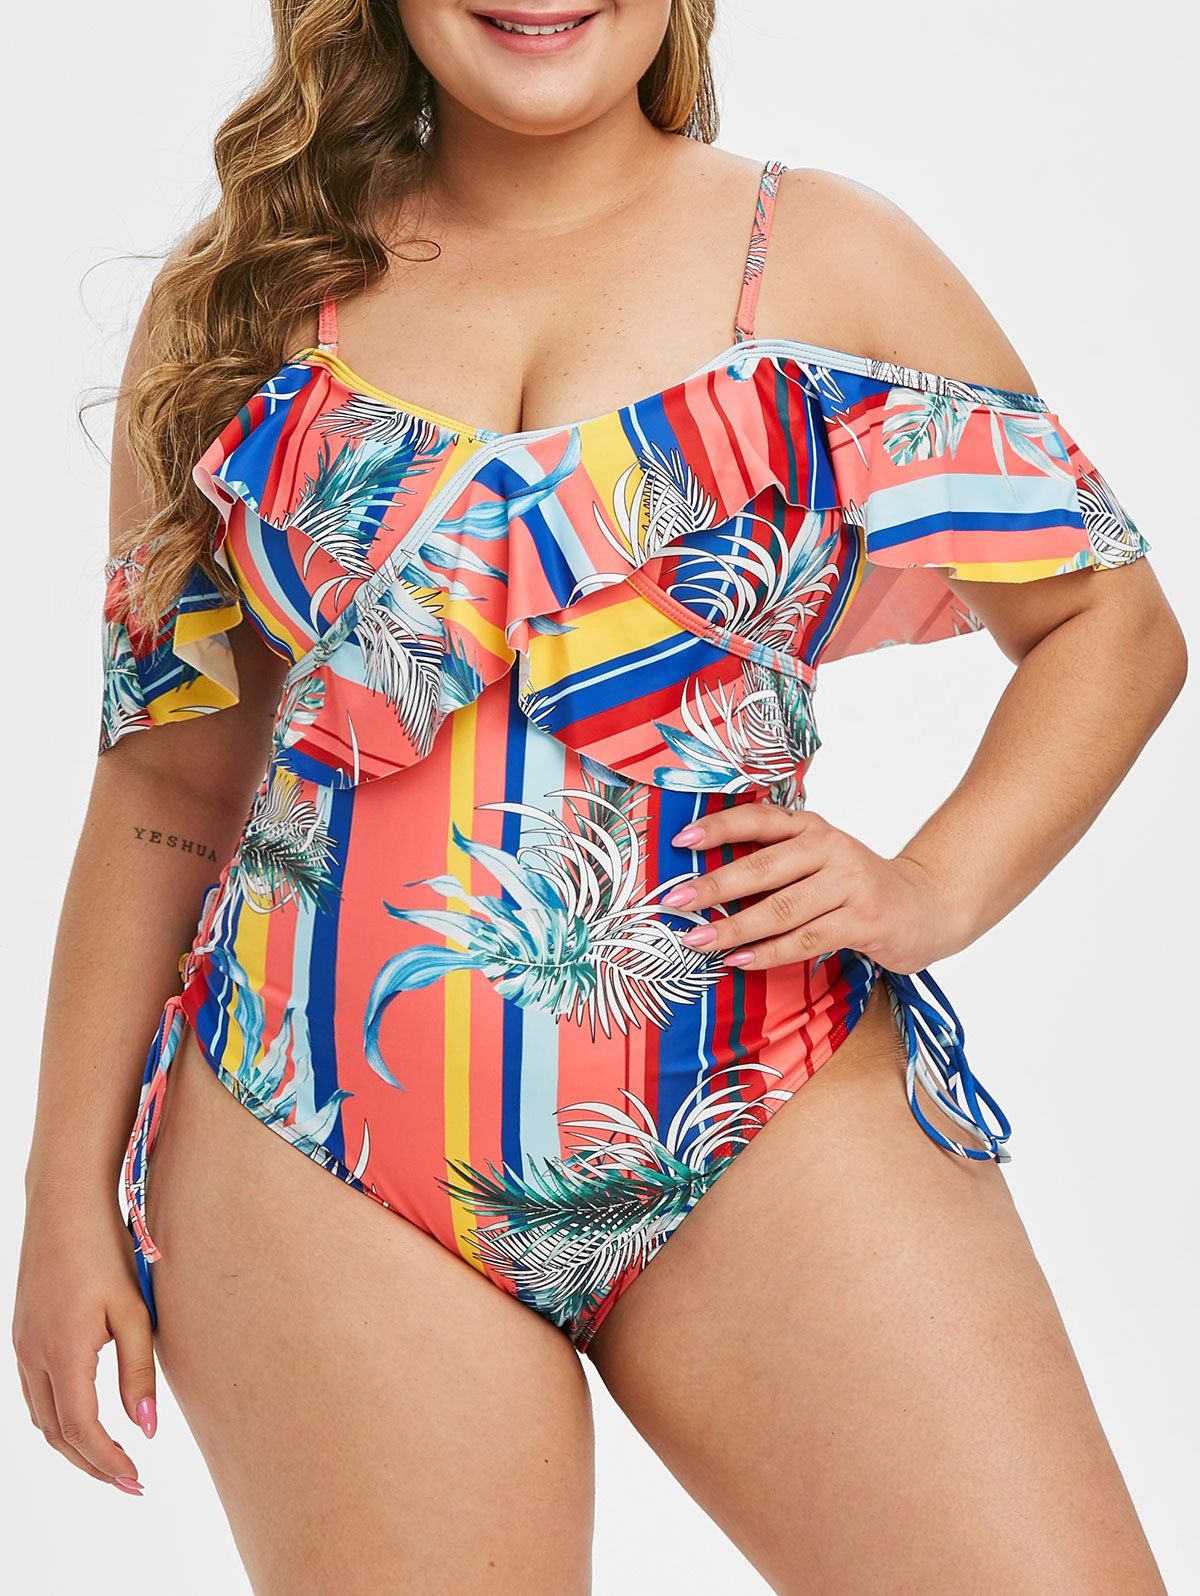 Plus Size Ruffled Lace Up Palm Print One-piece Swimsuit - WATERMELON PINK 1X